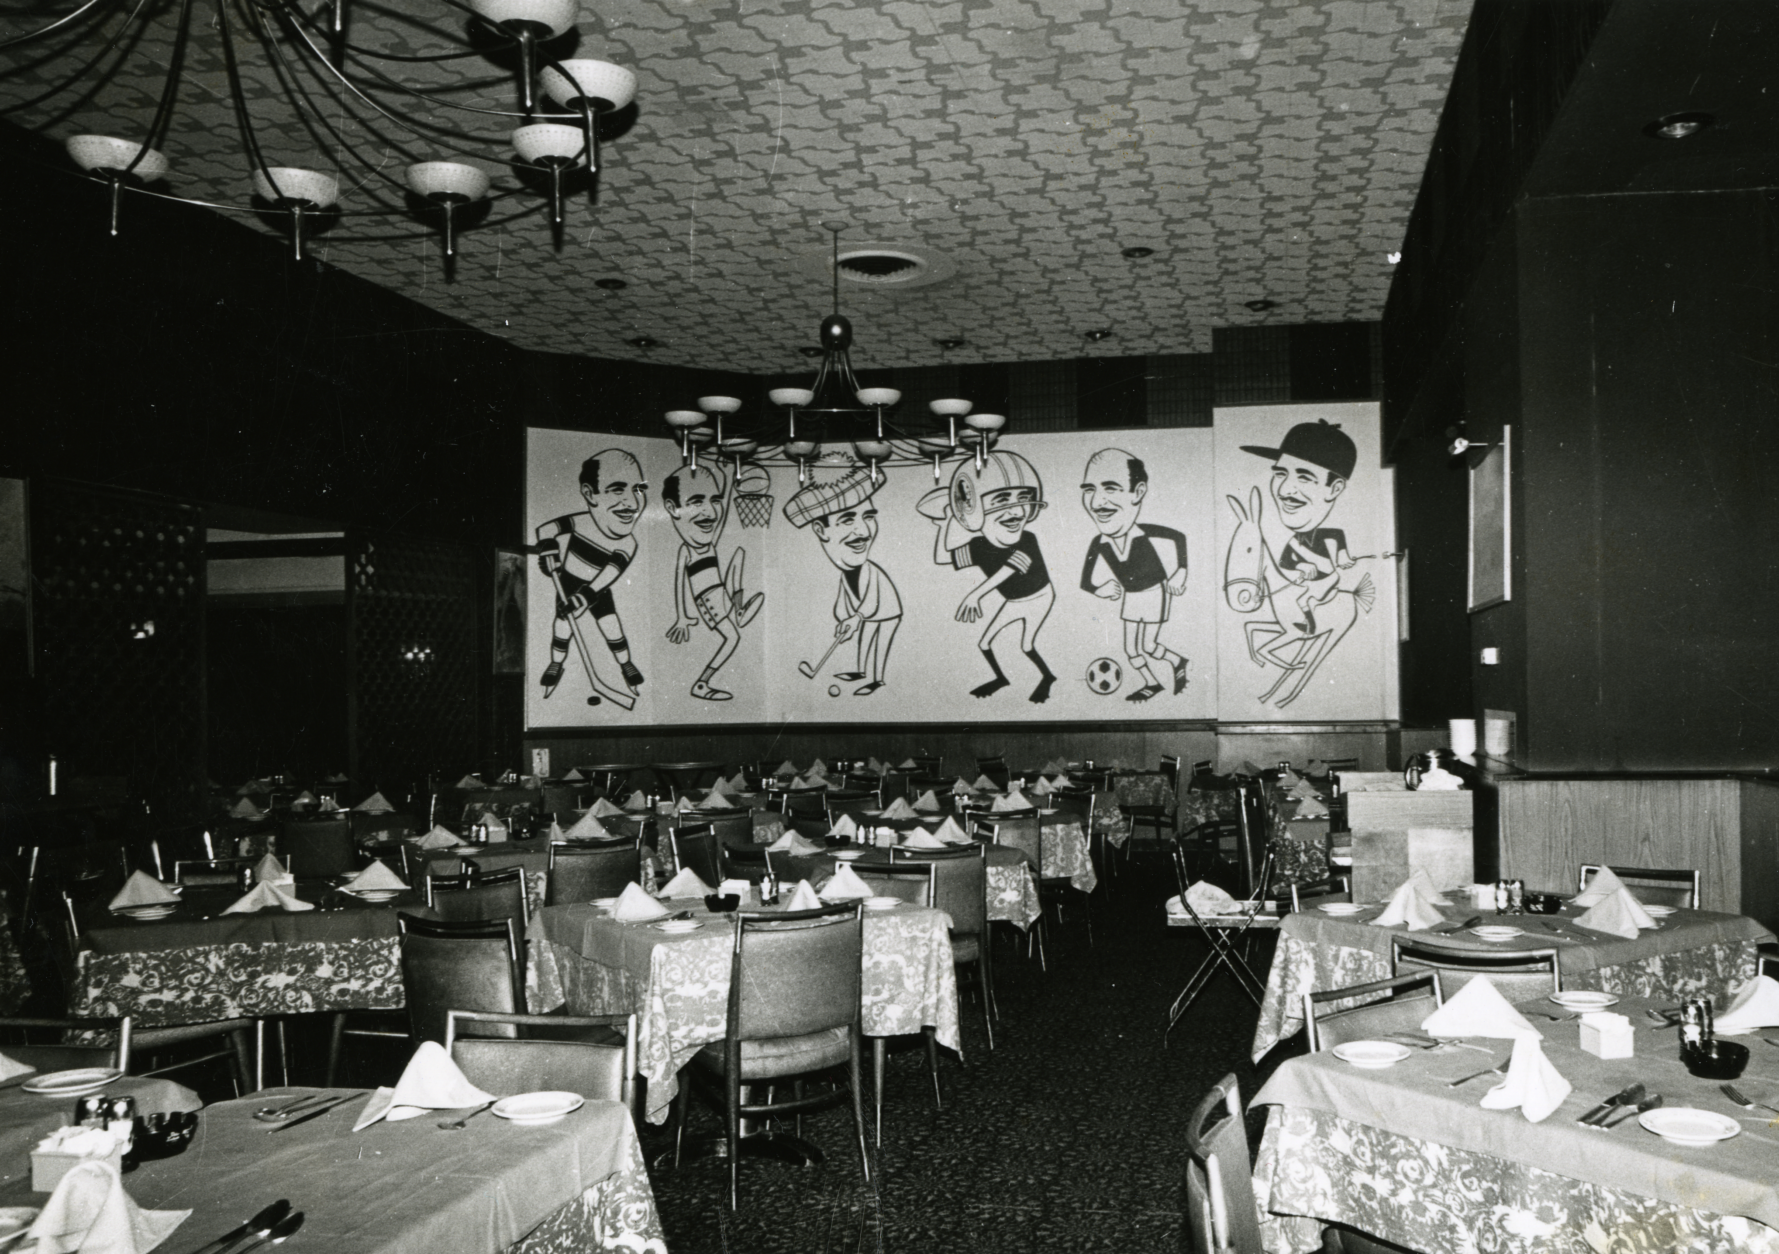 That original Duke’s in the LaSalle Building was done up in blue and brown hues. On the walls, large caricatures of a smiling Duke playing various sports smiled down. (Courtesy Historical Society of Washington, D.C.)